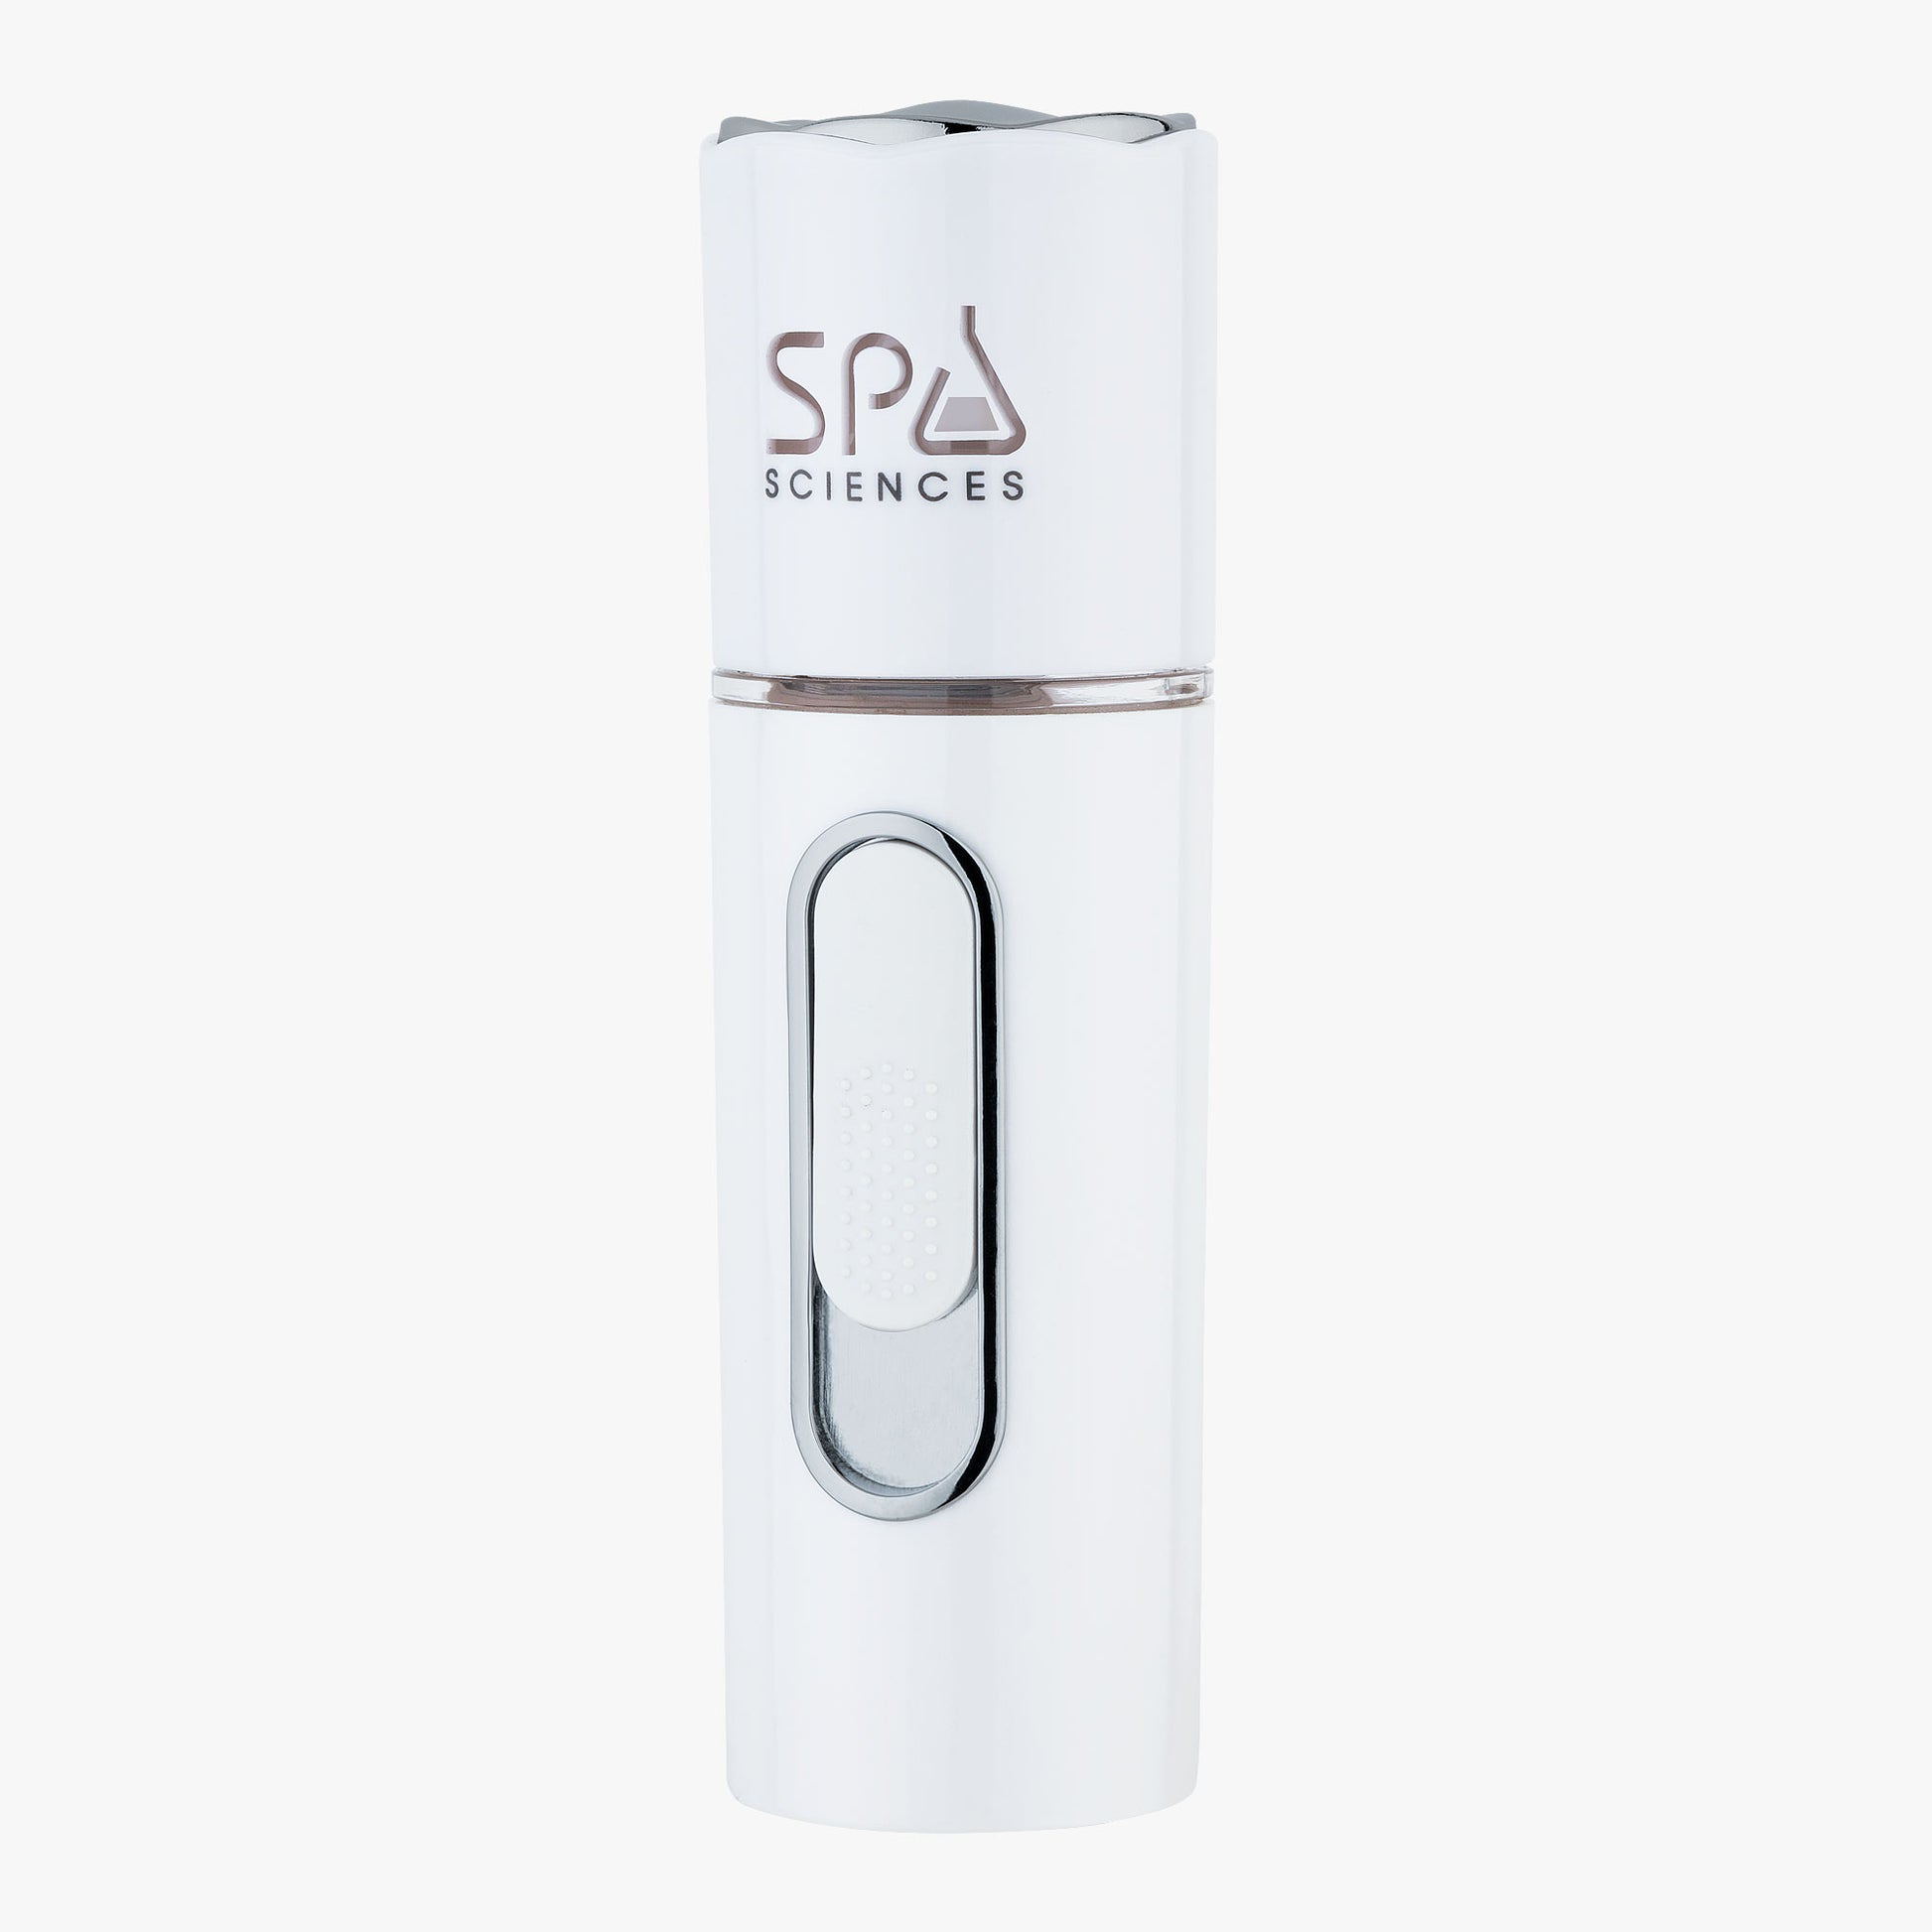 A white bottle with the Spa Sciences NANO MISTER logo on it.